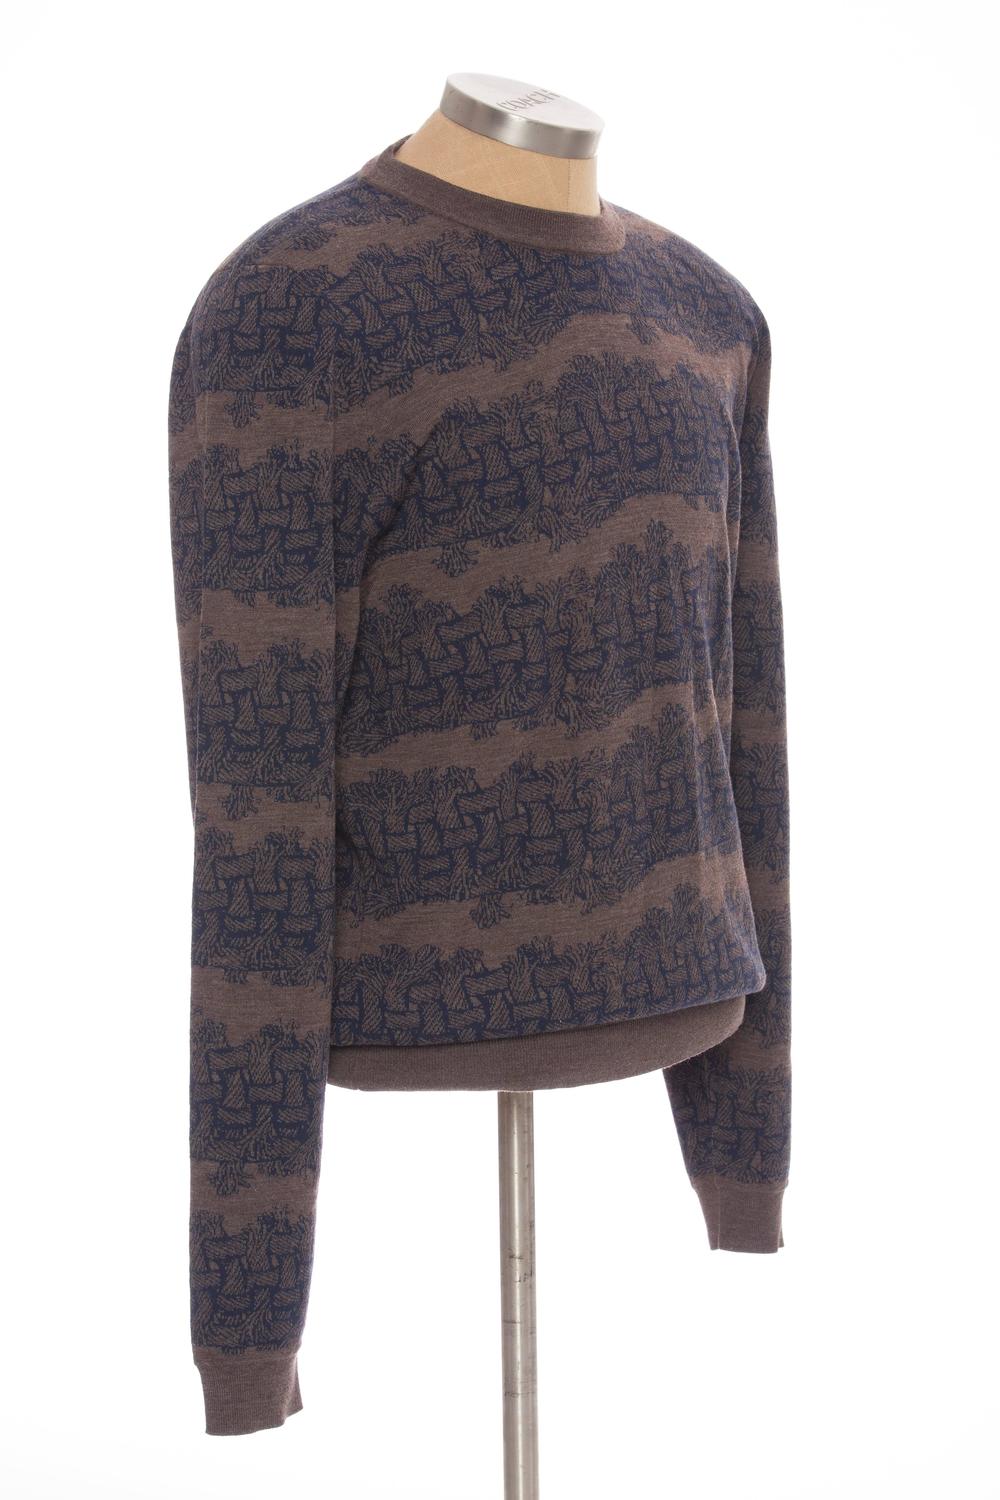 Louis Vuitton Christopher Nemeth Men&#39;s Wool Sweater With Rope Pattern, Fall 2015 For Sale at 1stdibs